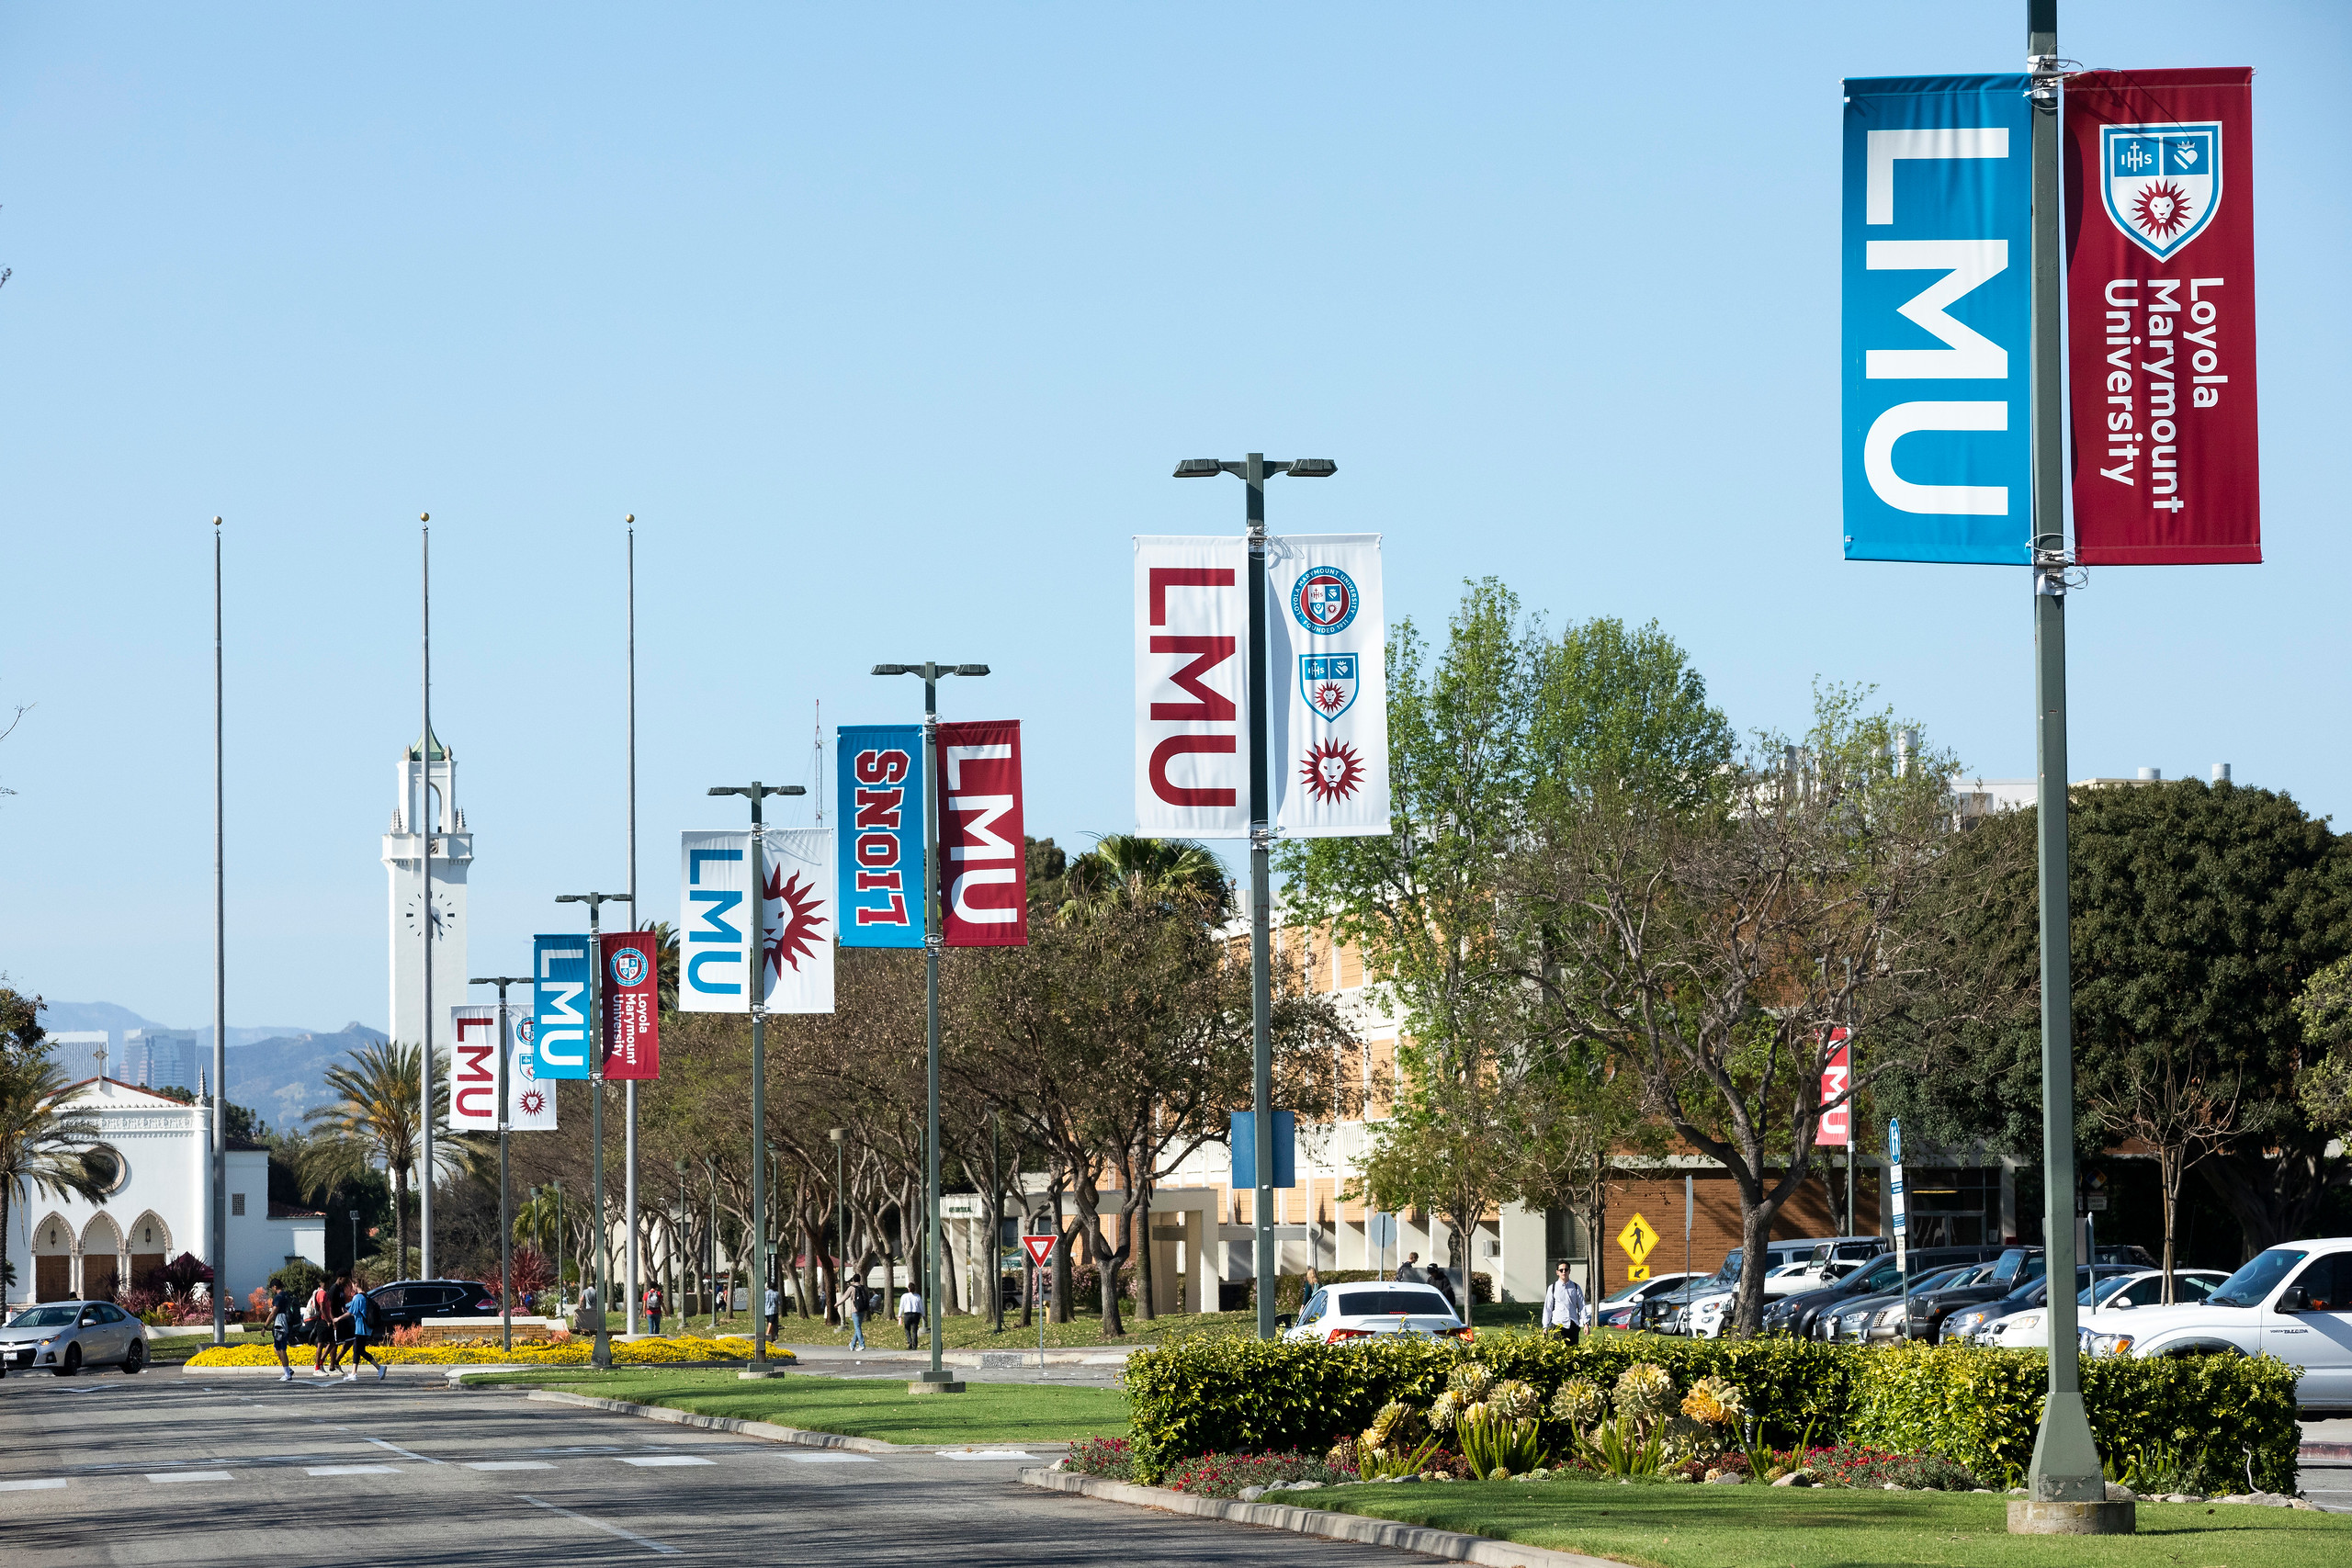 several LMU signs on poles in a row